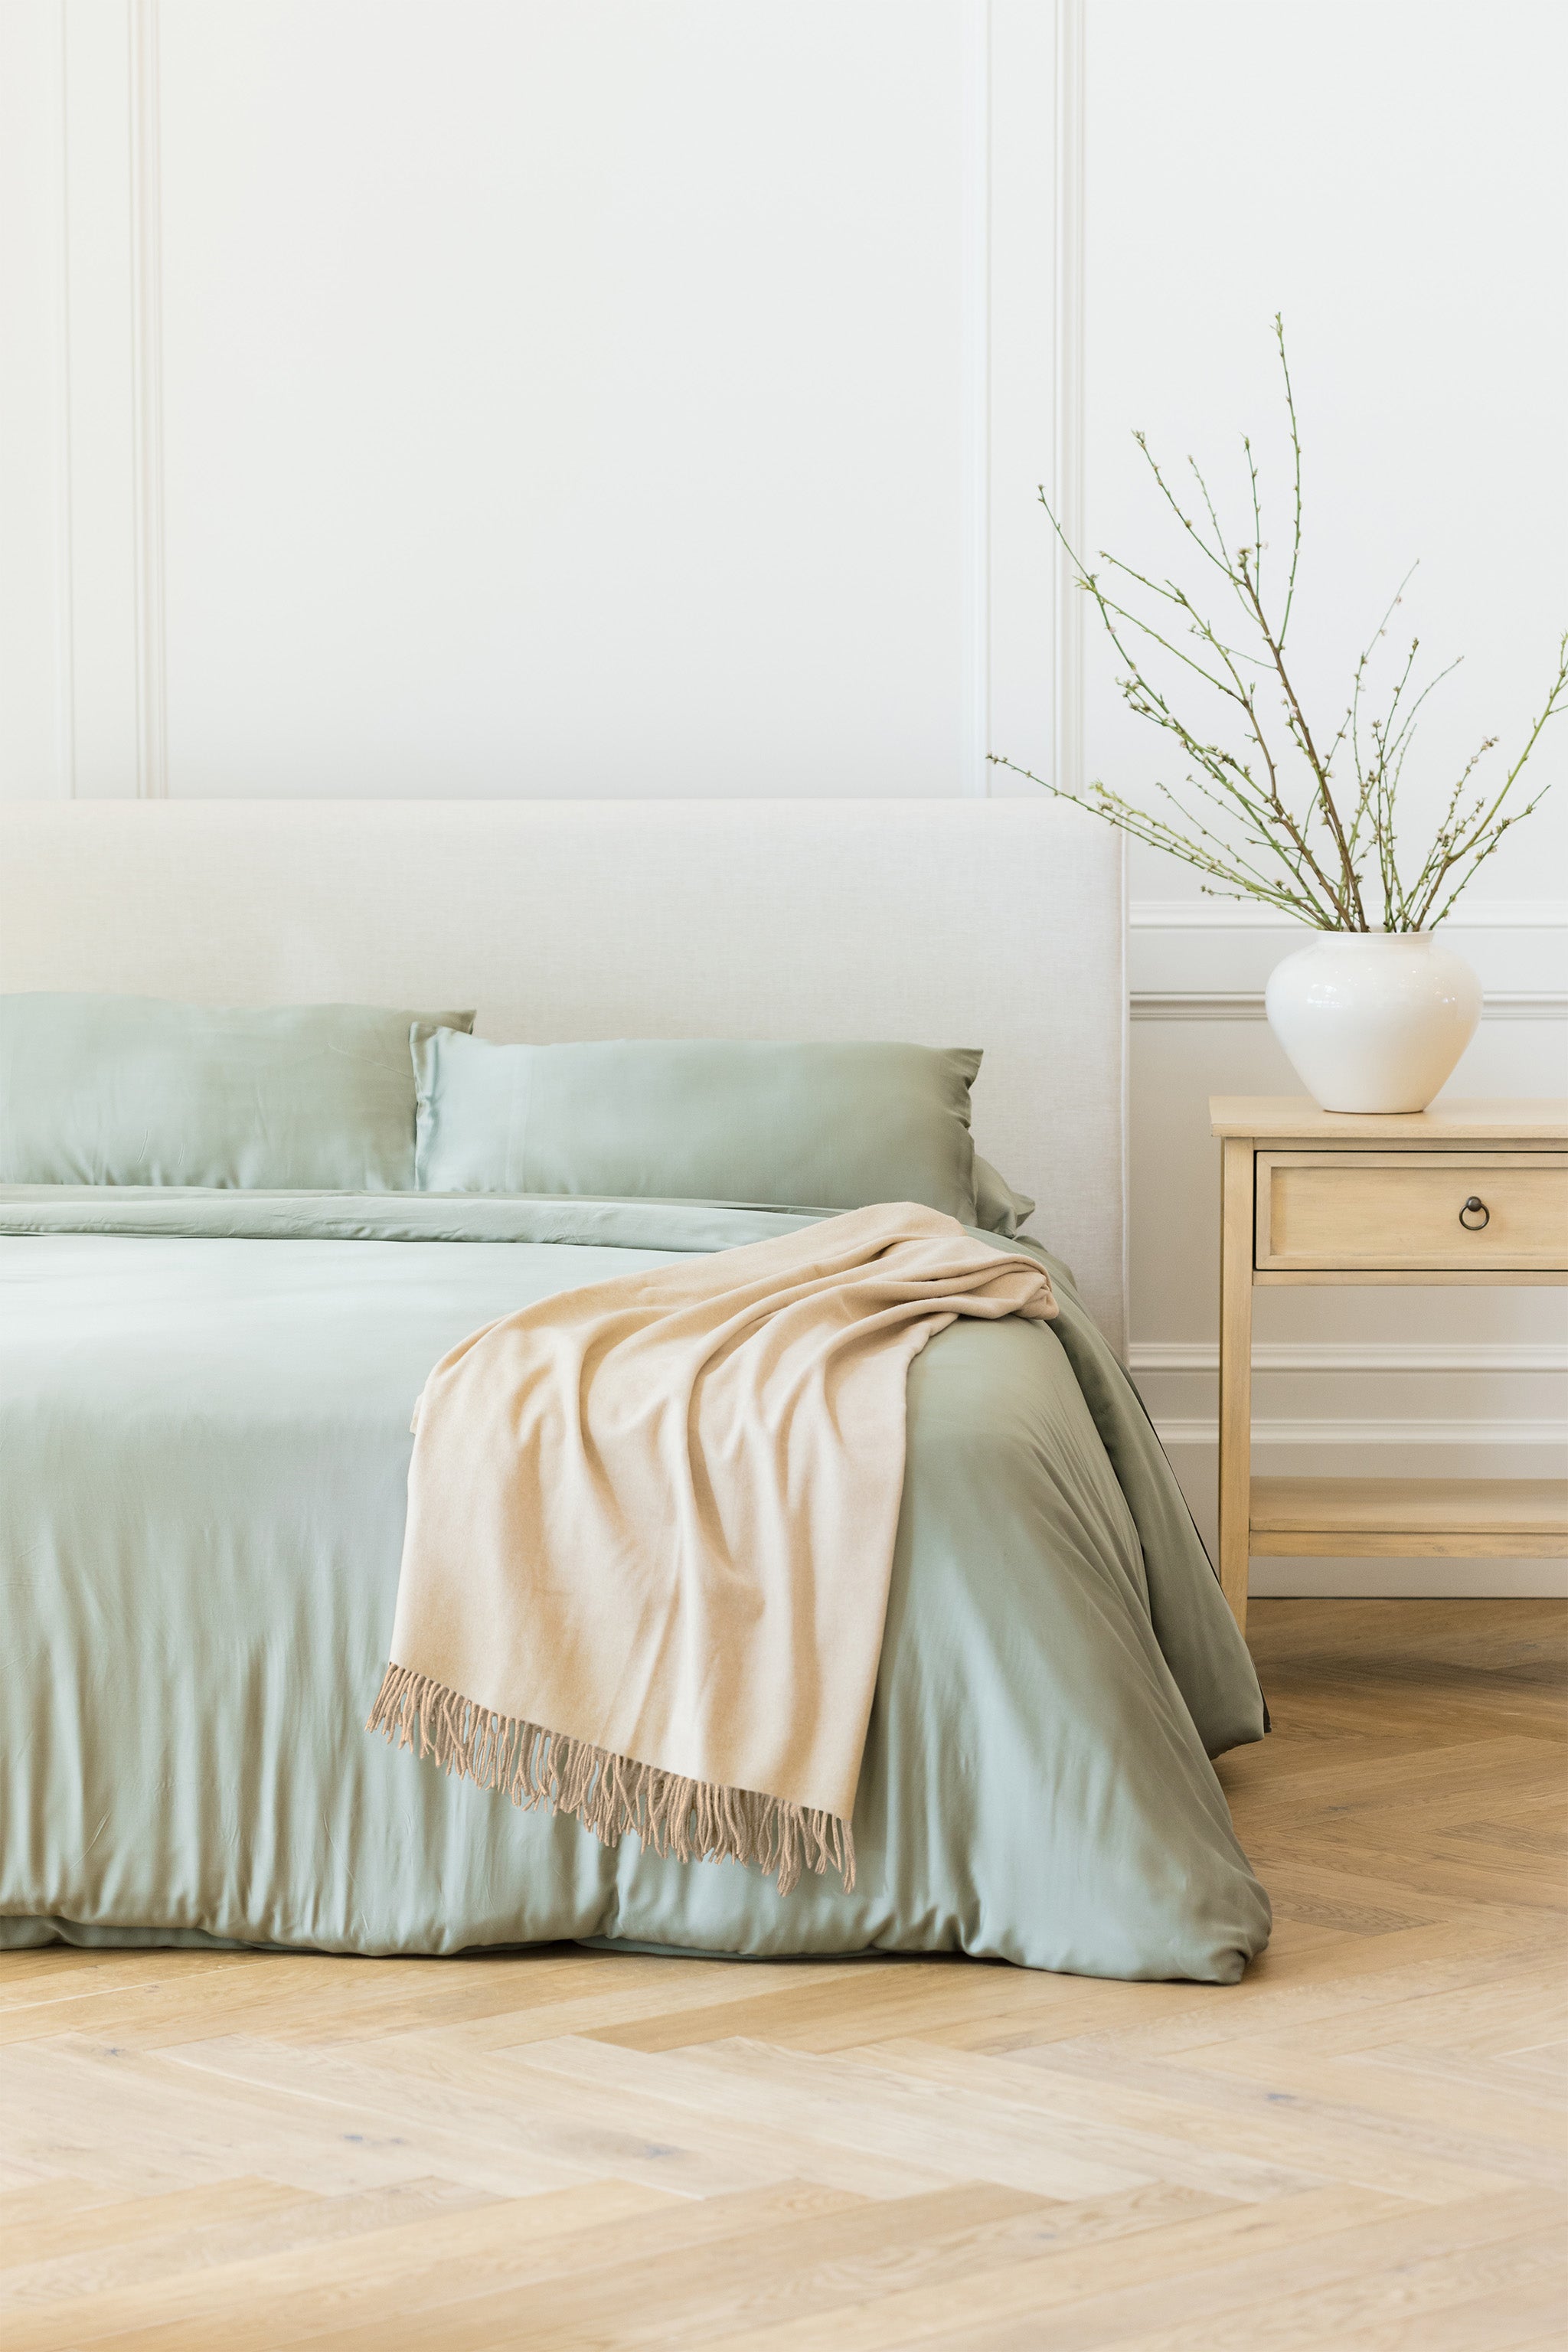 Dune tassel throw draped over bed with sage bedding |Color:Dune